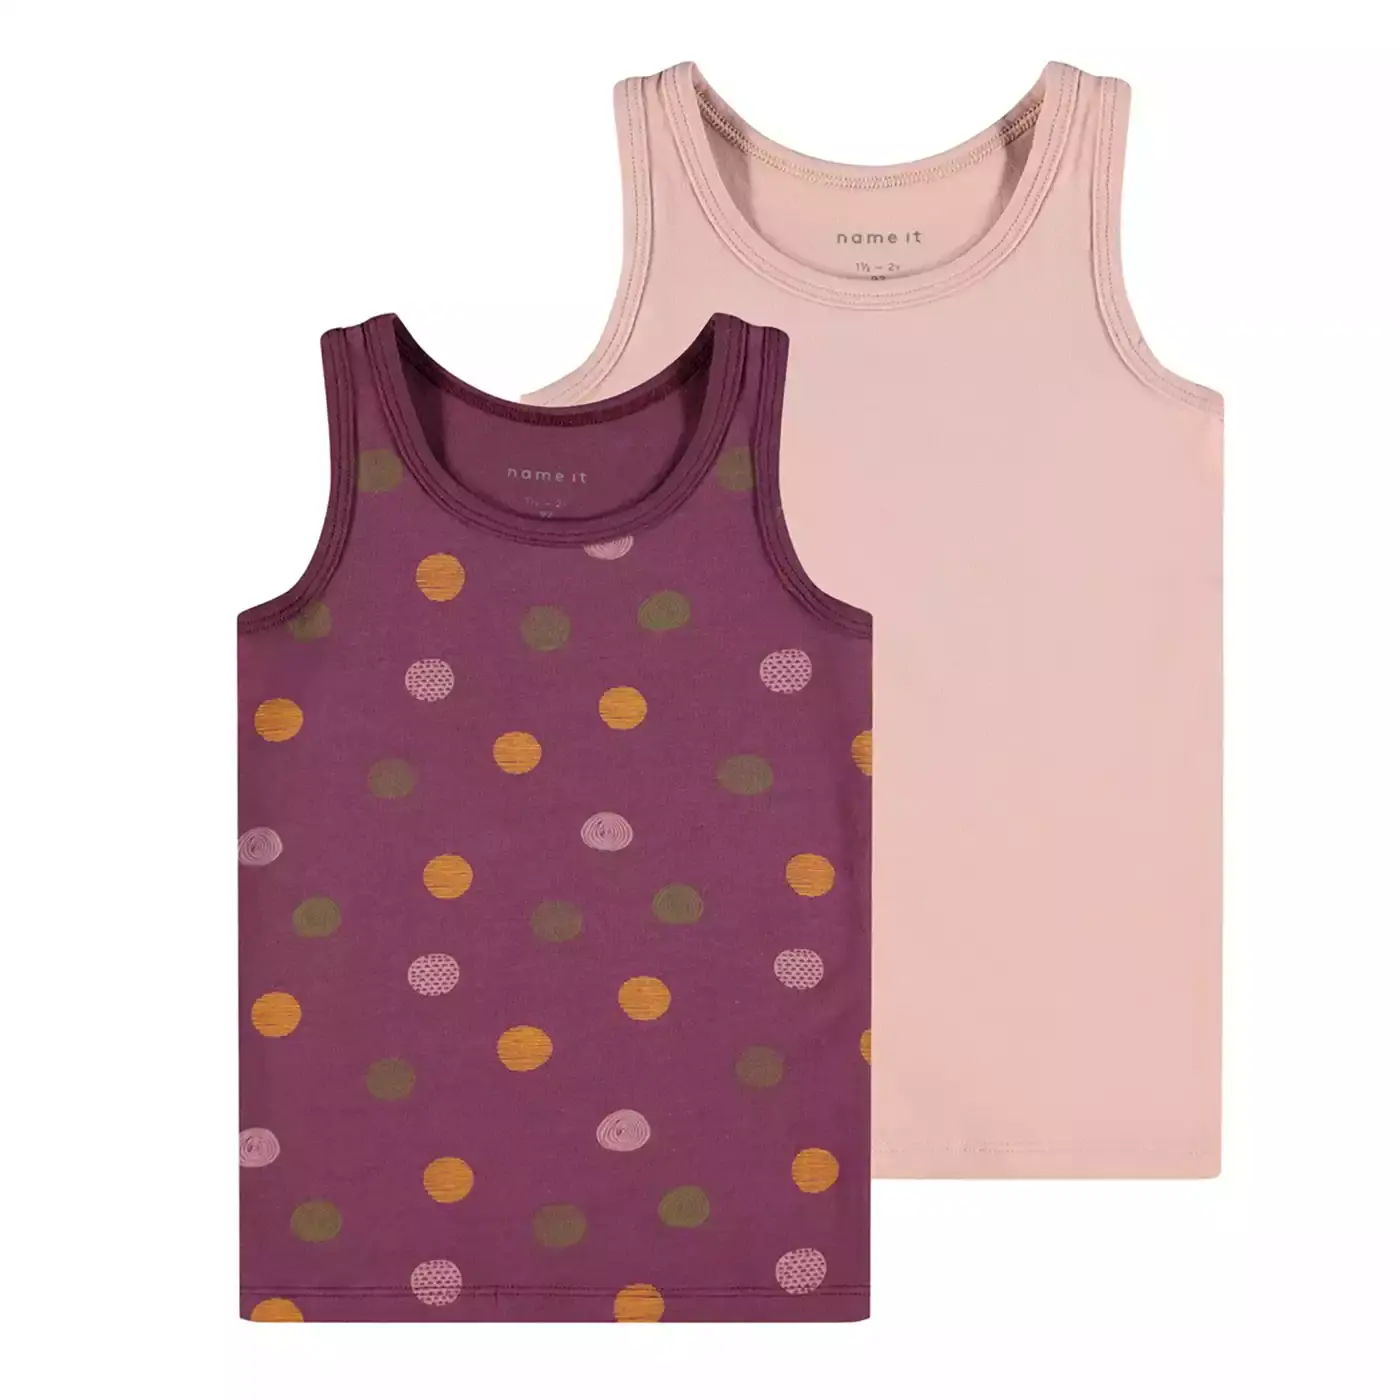 2er-Pack Tank Top Purple name it Pink Rosa Lila M2009580517005 1